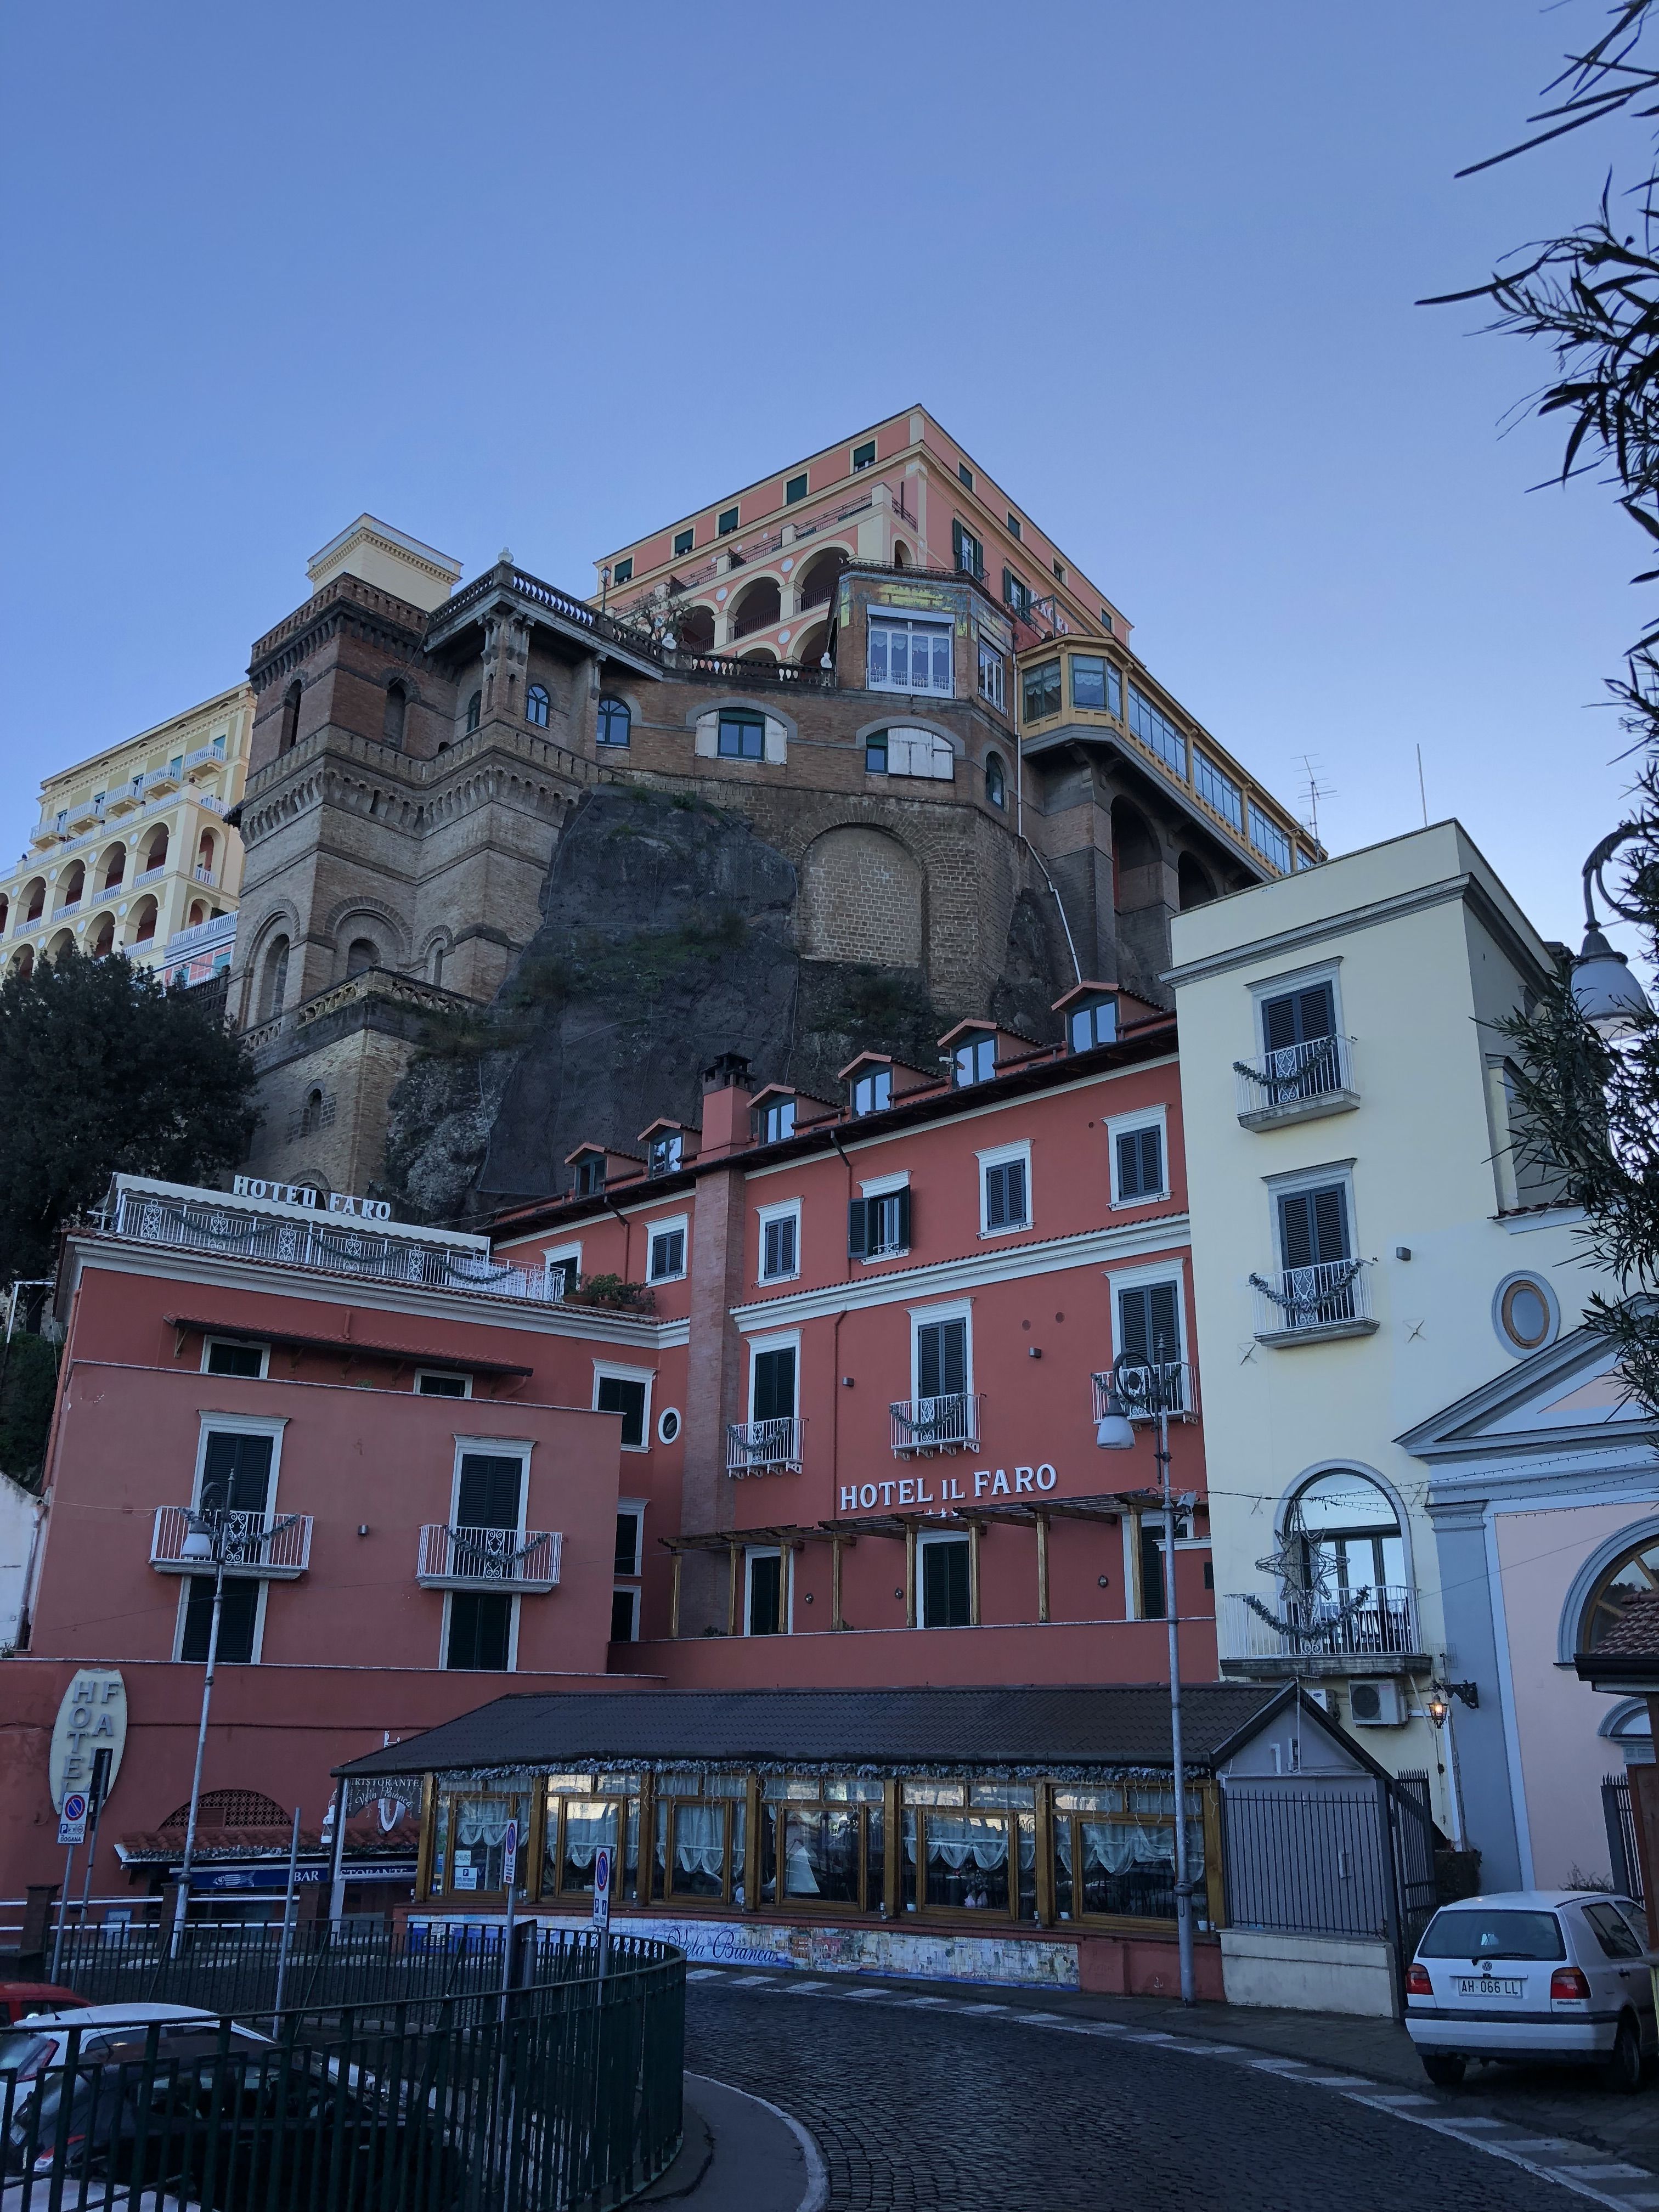 We're looking up a cliff, and we can see three hotels nearly perched on top of one another. The nearest, lowest one is called Hotel Il Faro and it has a restaurant out the front.